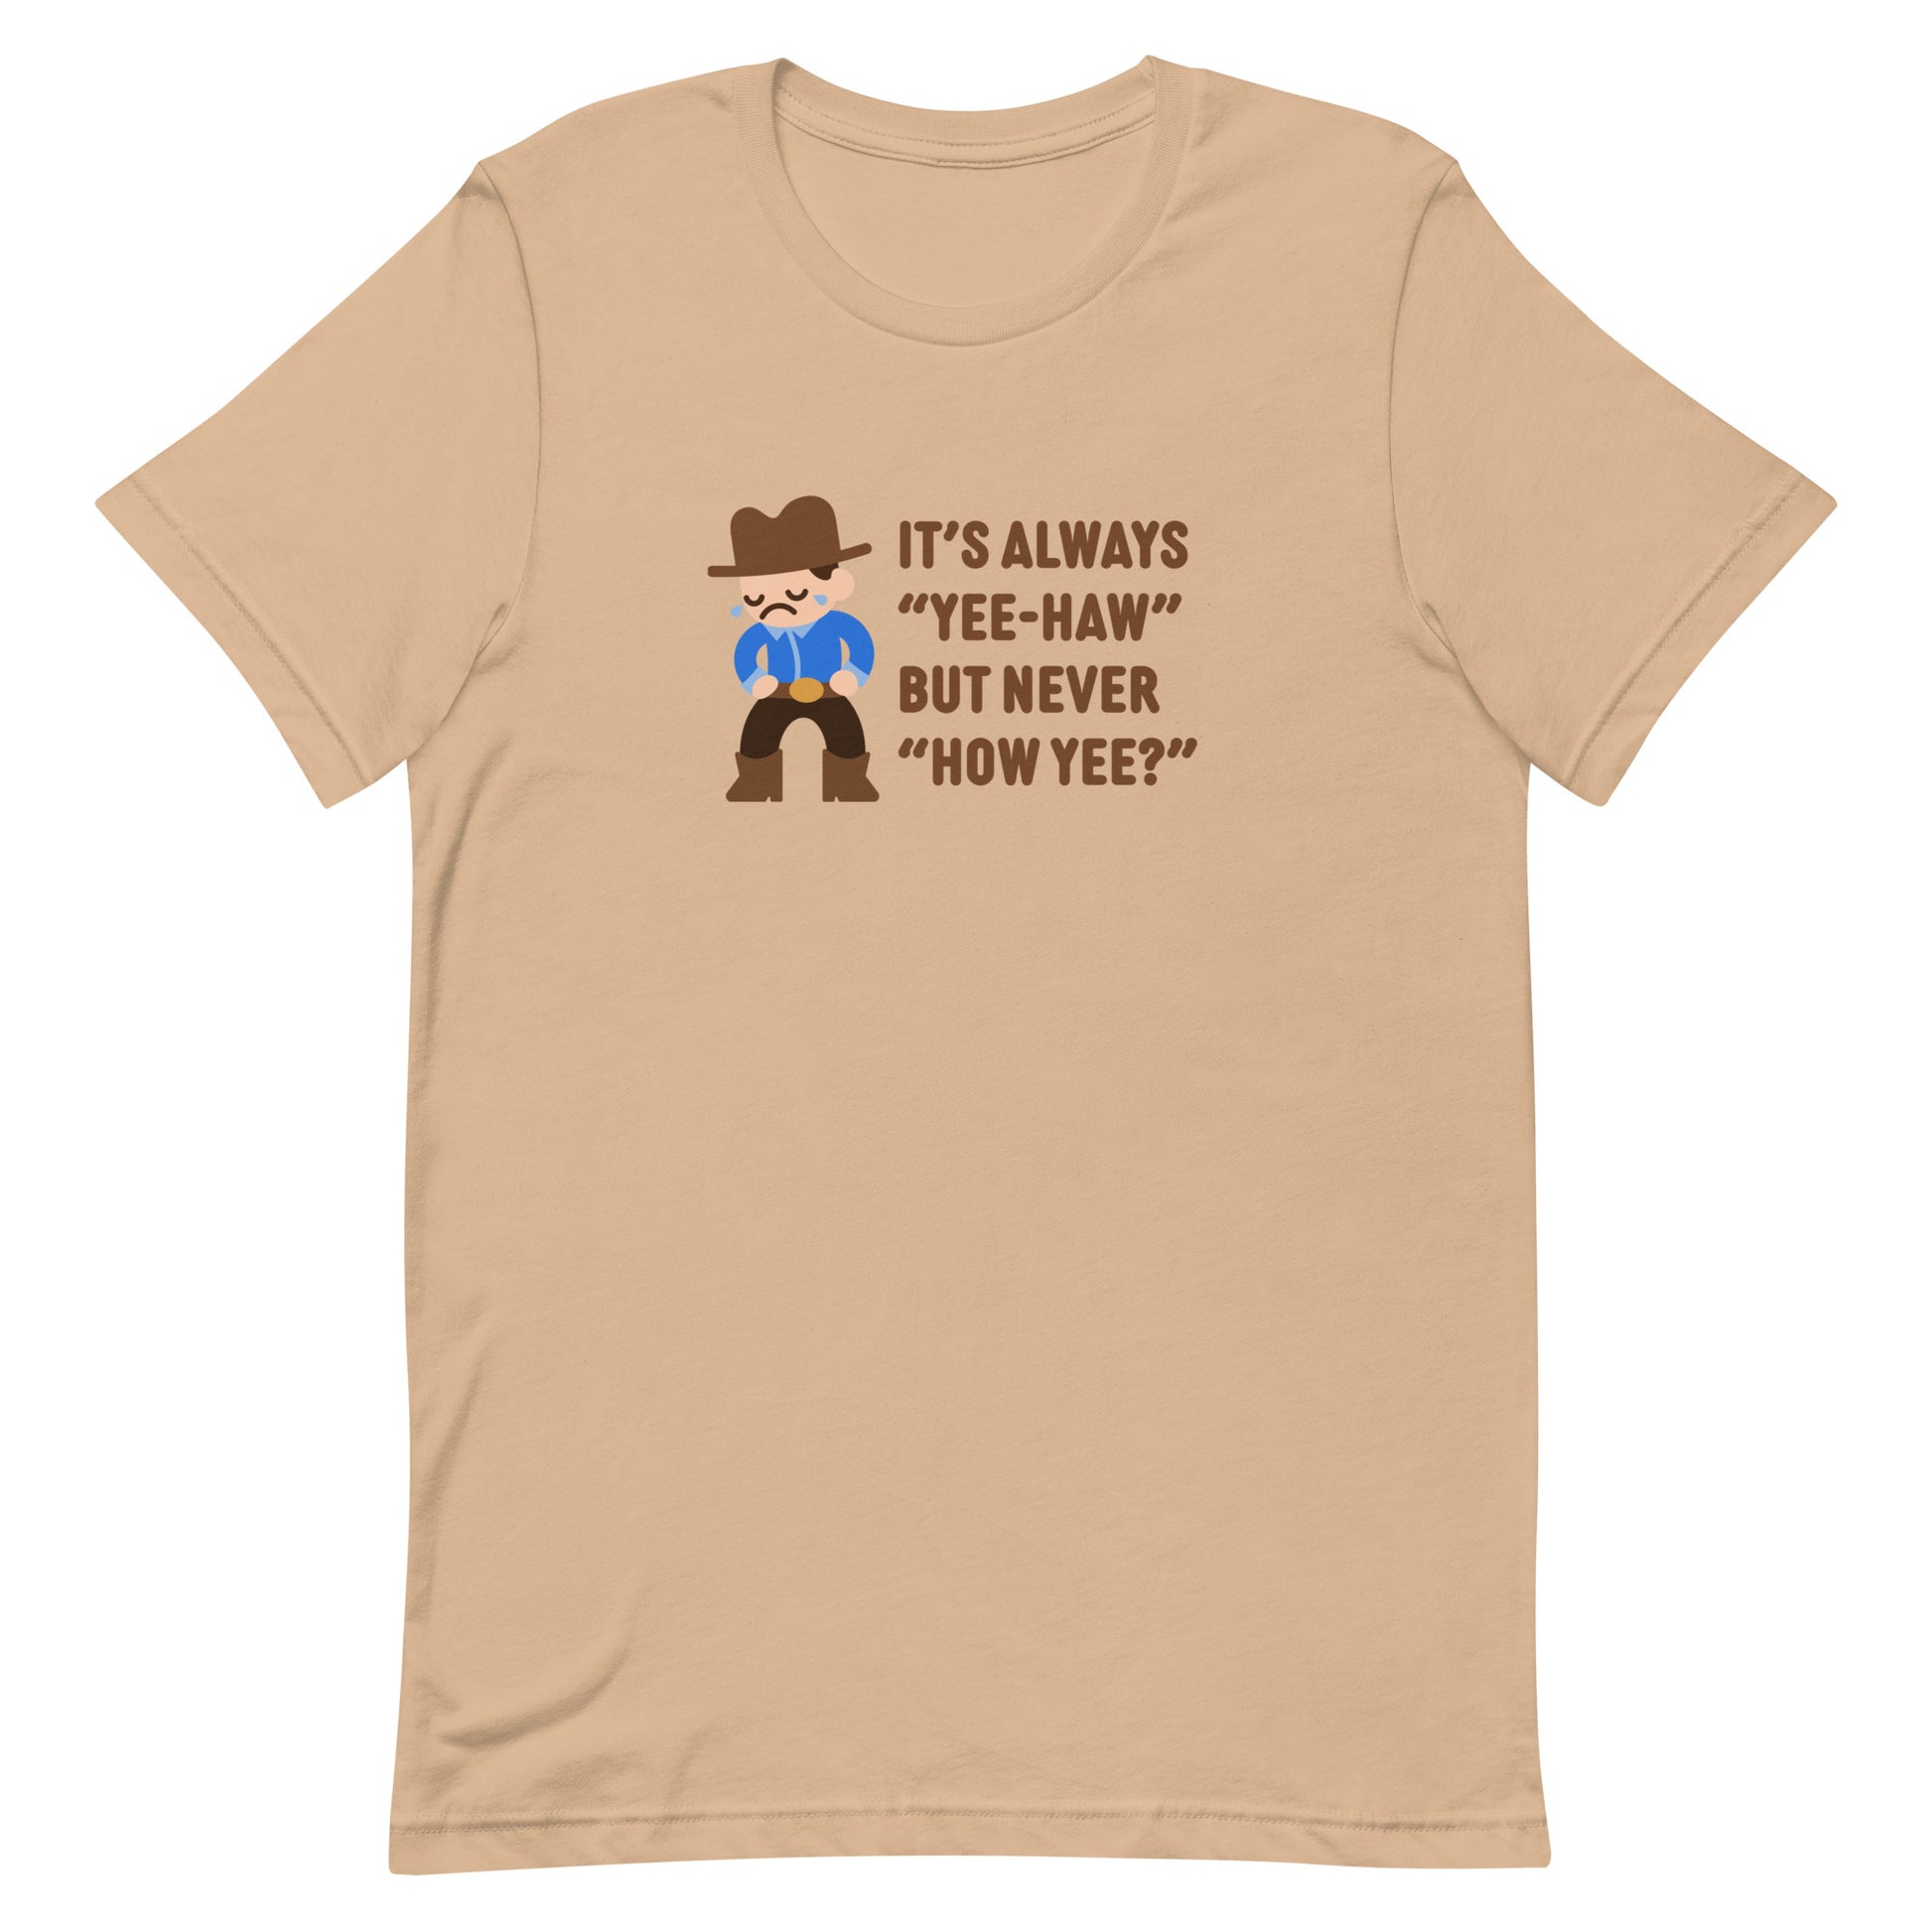 A tan crewneck t-shirt featuring an illustration of a crying cowboy wearing a blue shirt. Text alongside the cowboy reads "It's always "yee-haw" but never "How yee?""